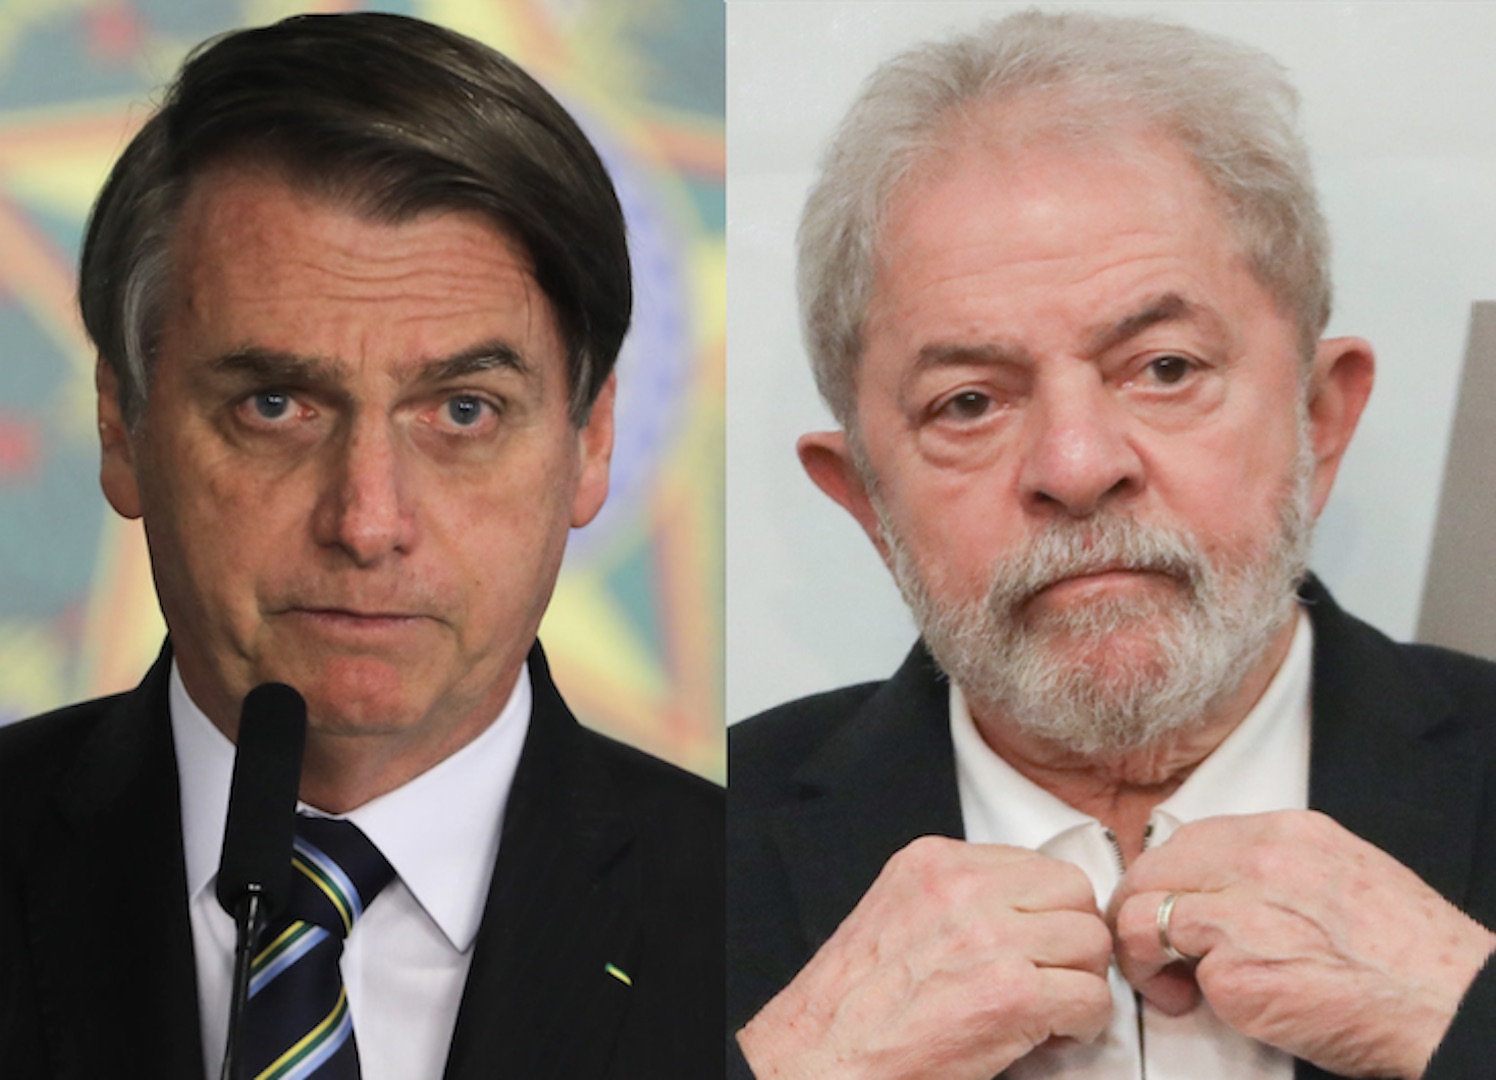 A report on the new VEJA edition shows how President Jair Bolsonaro and ex-president Lula, regarded as leading players in the next race to the Planalto Palace, have so far been instrumental in the municipal elections.